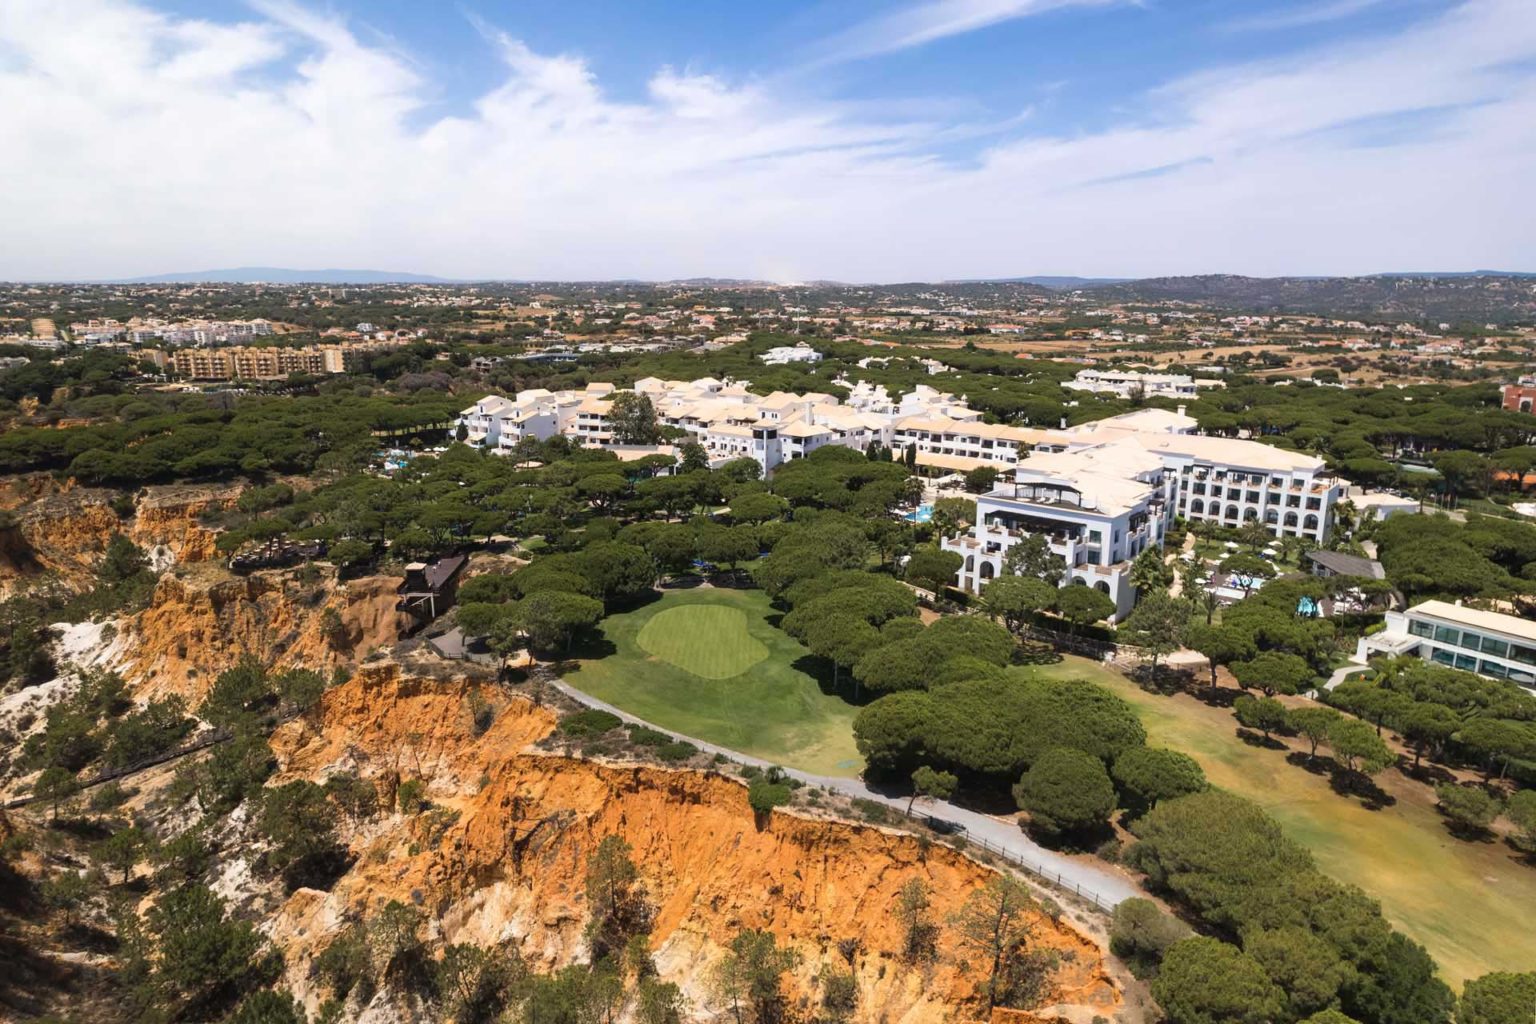 Aerial view of the Pine Cliffs Resort in Albufeira, Portugal